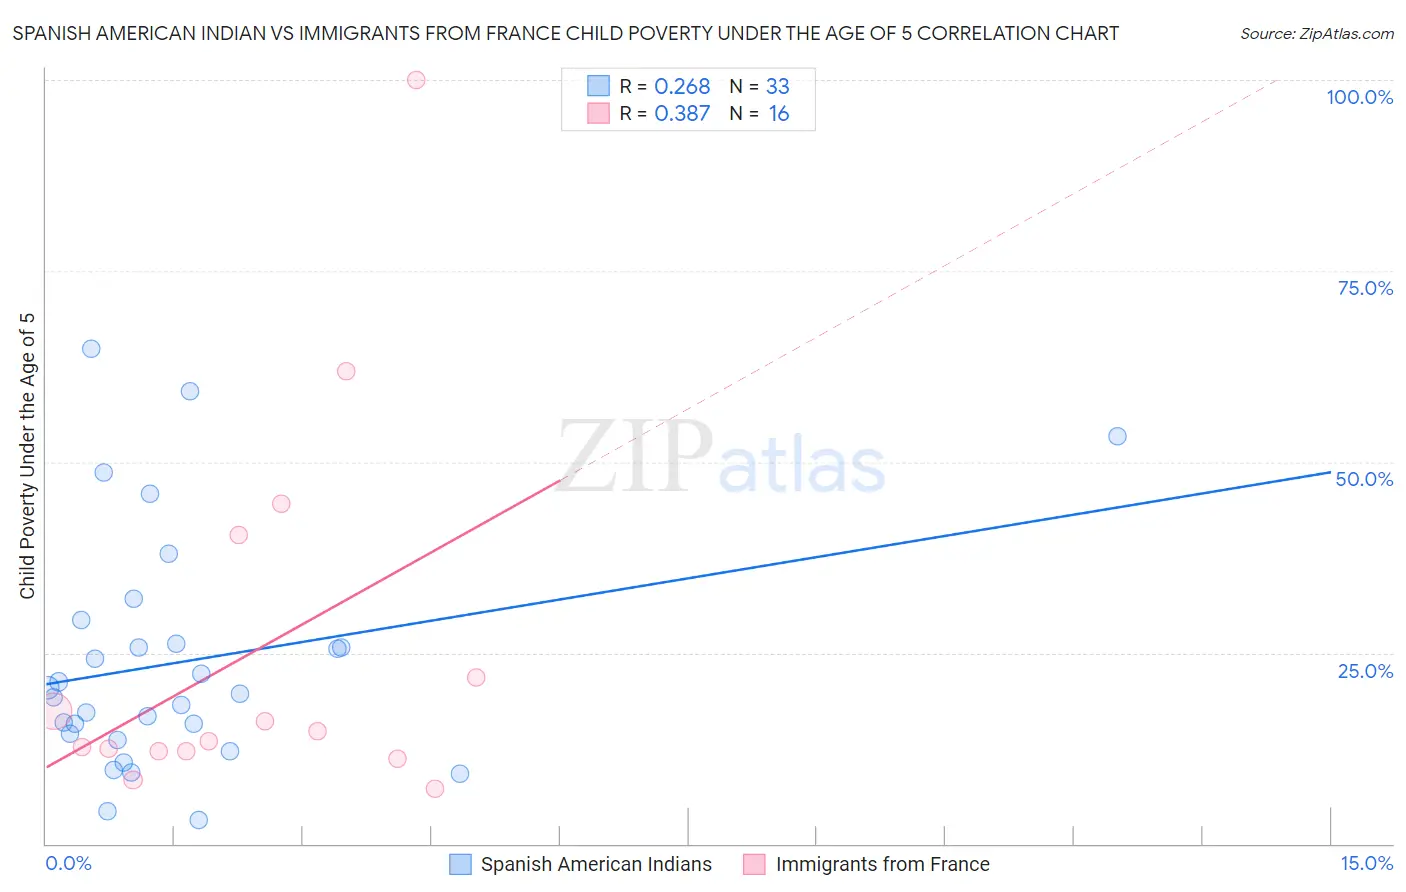 Spanish American Indian vs Immigrants from France Child Poverty Under the Age of 5